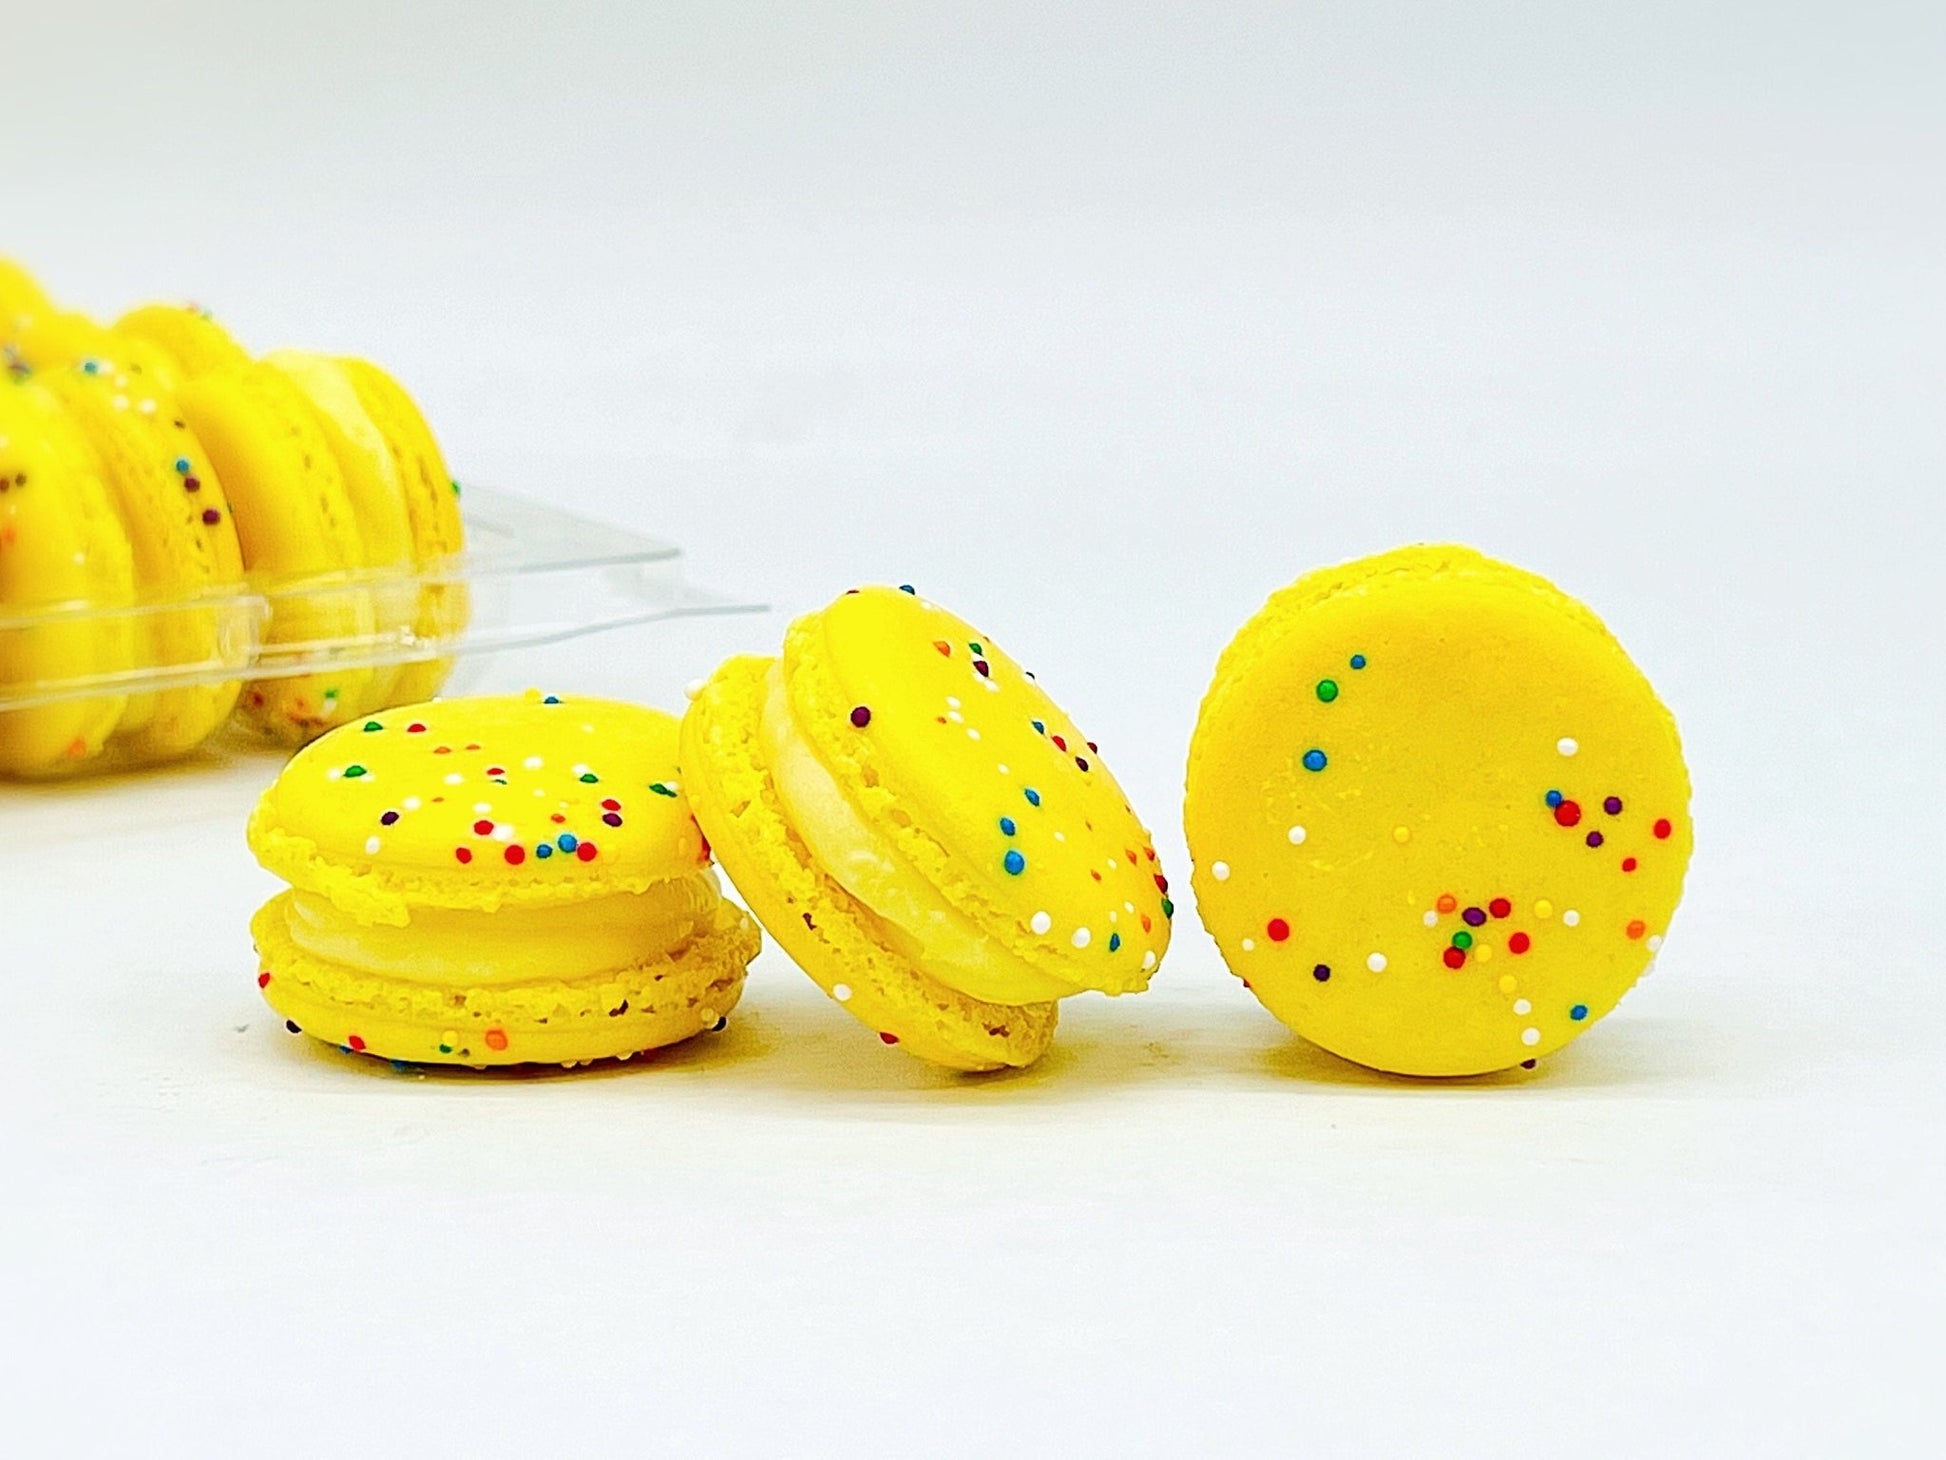 50 Pack Passionfruit White Chocolate French Macaron Value Pack - Macaron Centrale